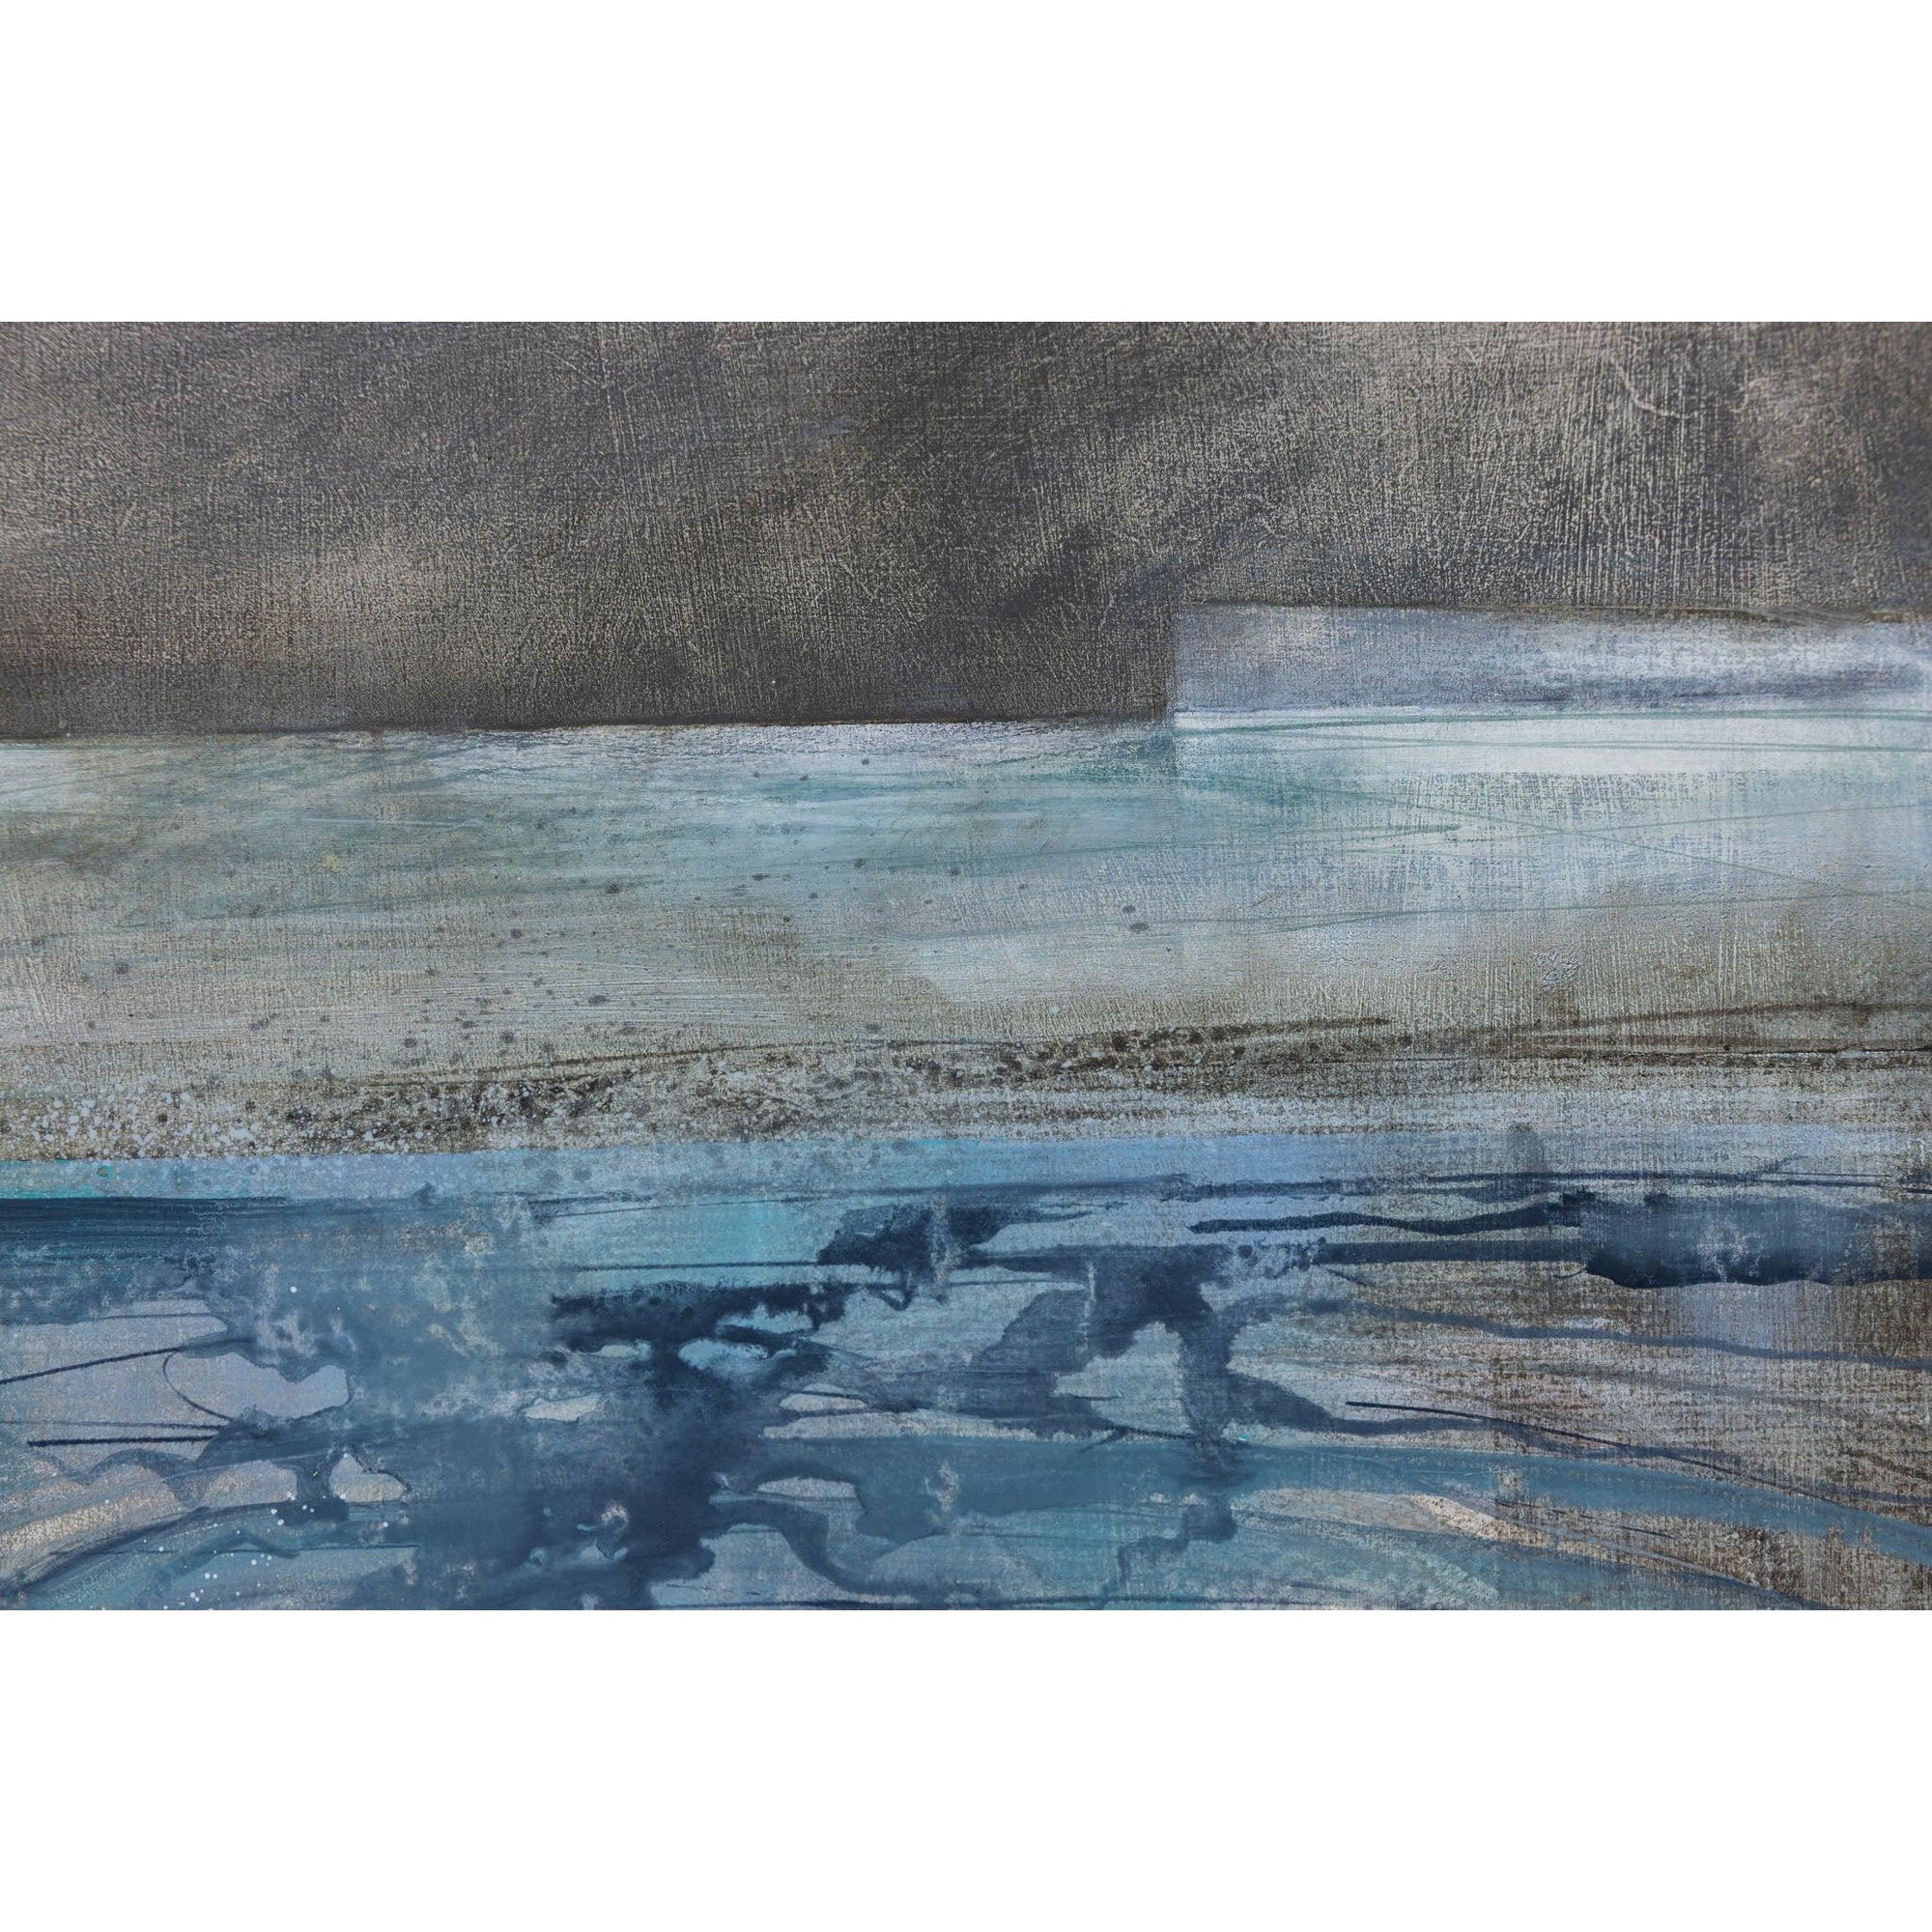 ‘On a dark beach' oil on board by Ruth Taylor, available at Padstow Gallery, Cornwall